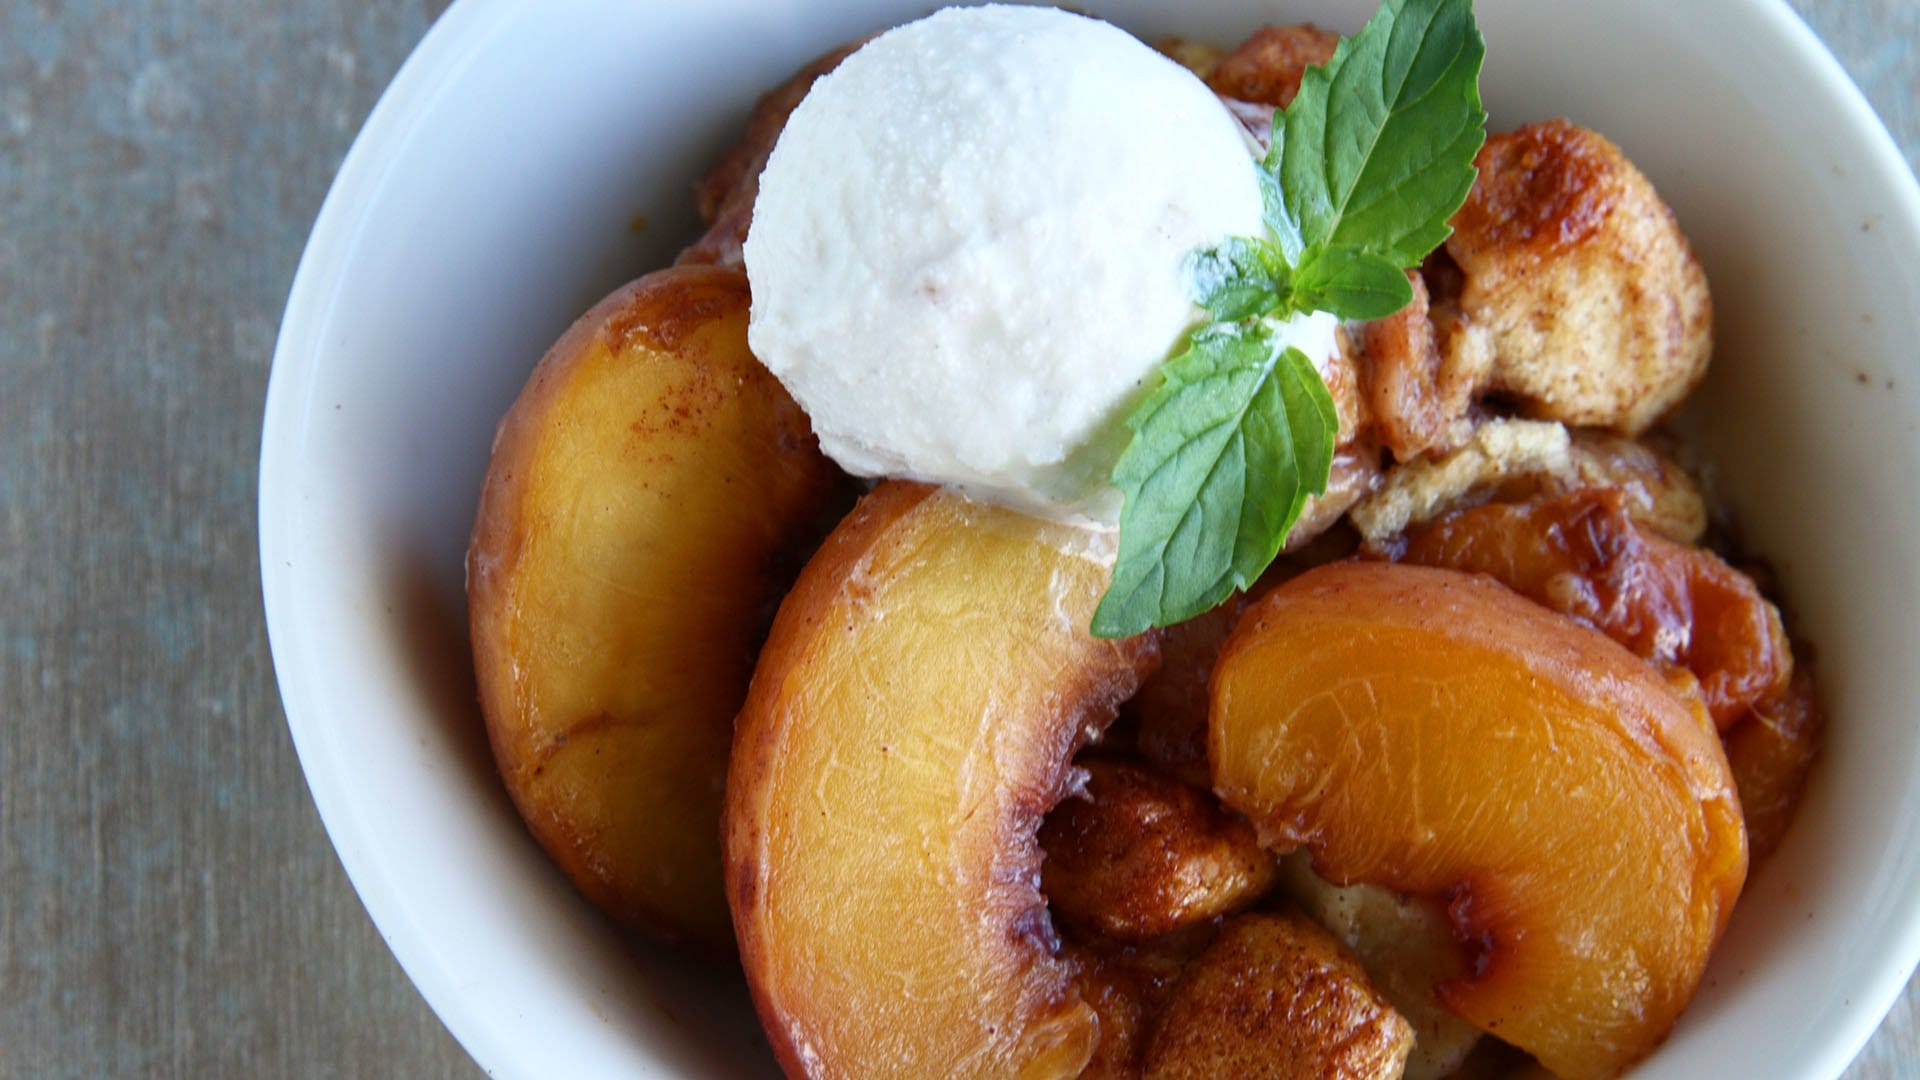 Amazing Peach Cobbler Bake - Afternoon Baking With Grandma